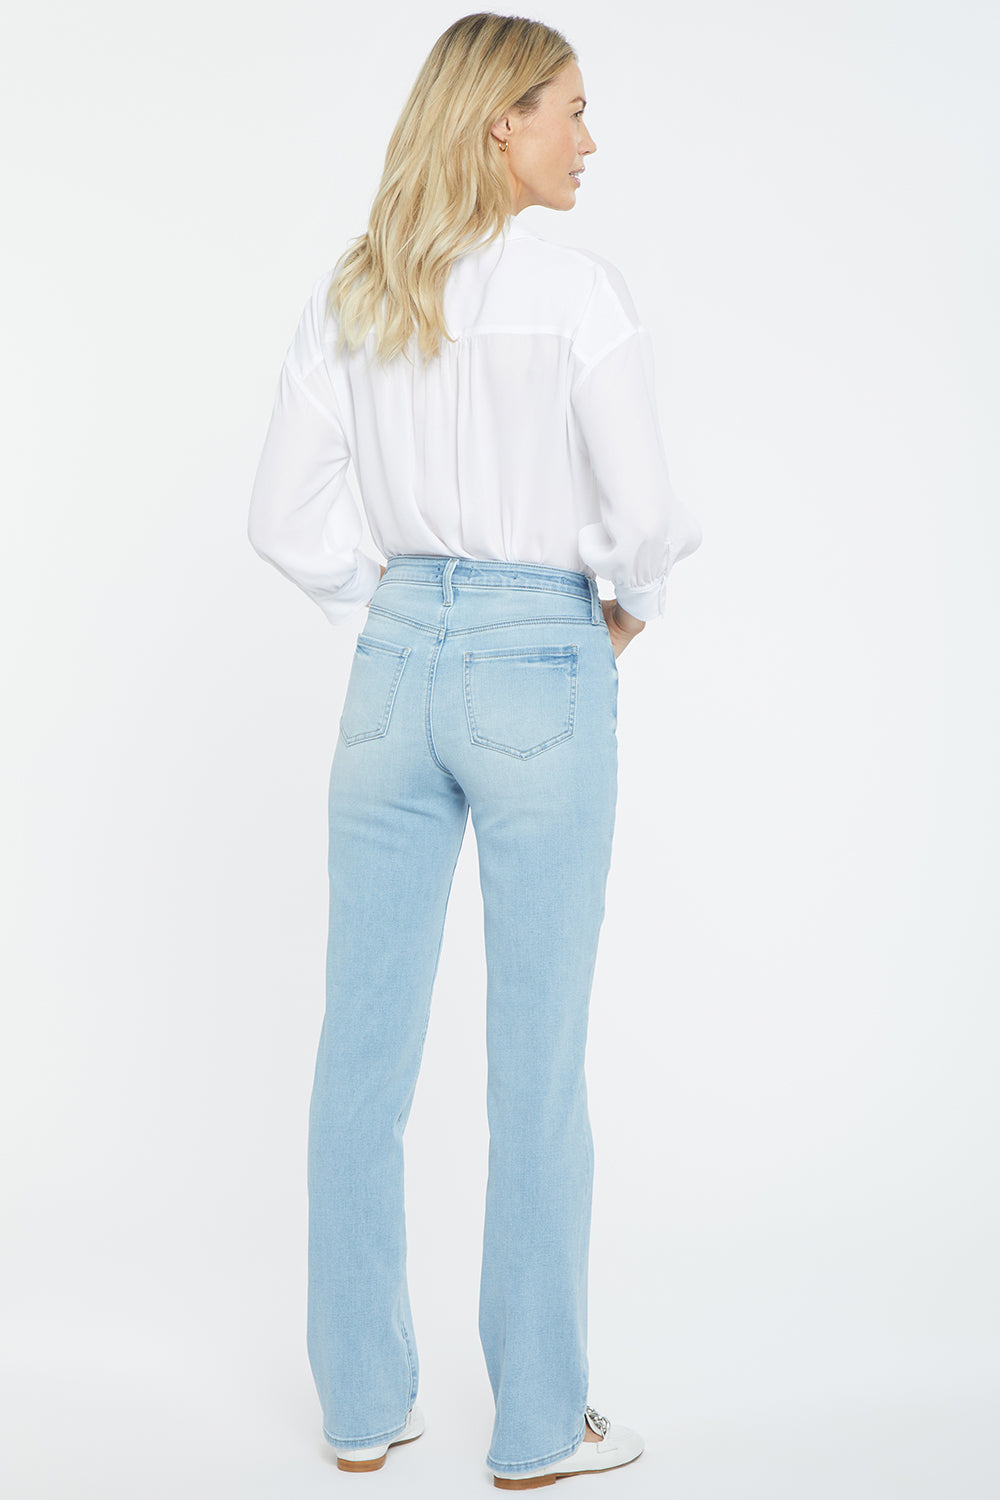 NYDJ Bailey Relaxed Straight Jeans  - Northstar